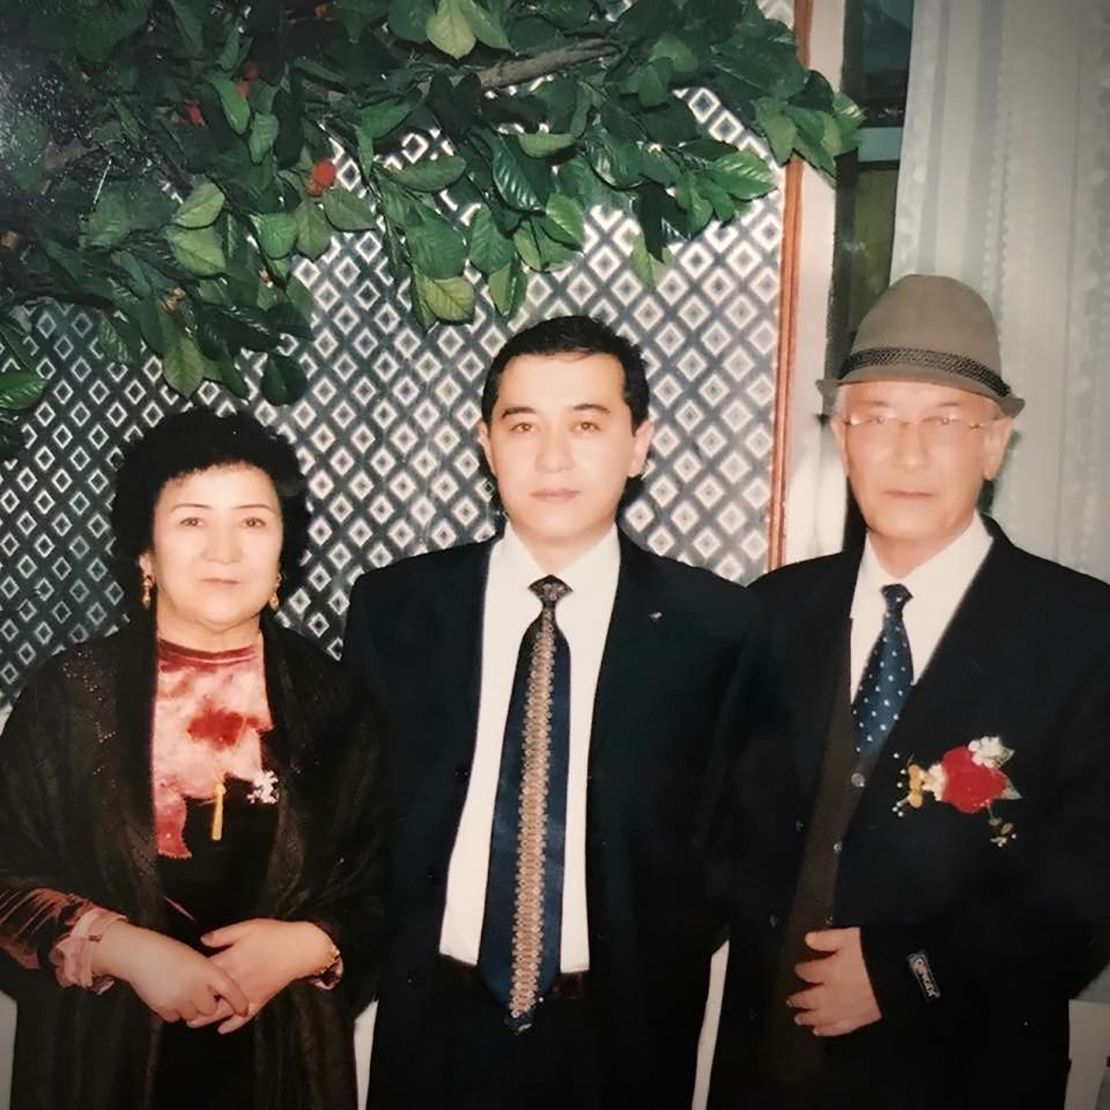 Uyghur journalist Gulchehra Hoja's brother and parents in an undated family photo